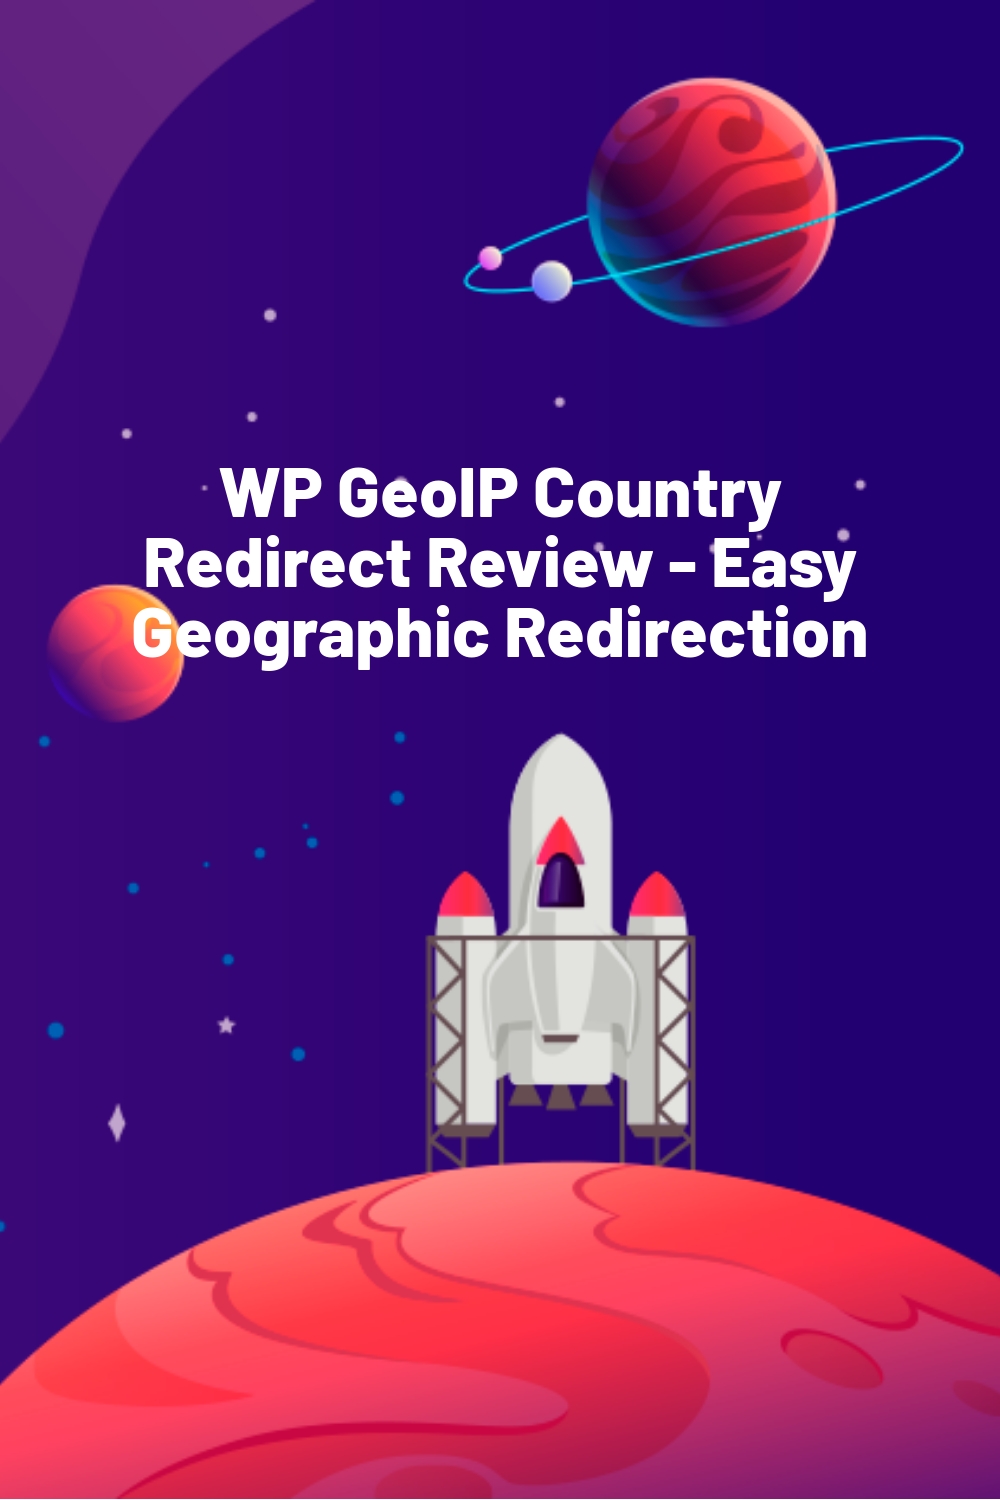 WP GeoIP Country Redirect Review – Easy Geographic Redirection